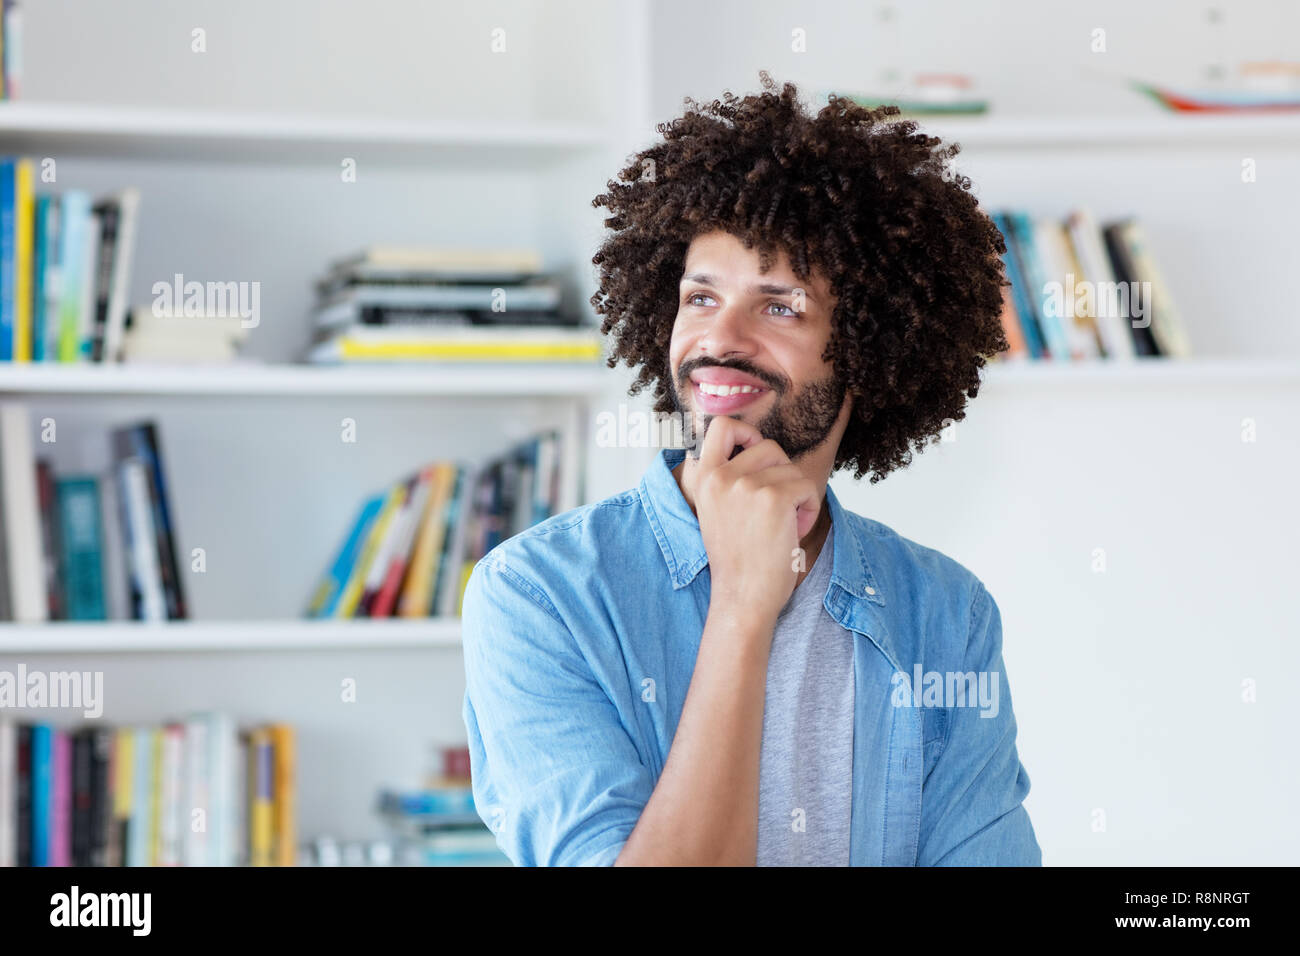 Thinking hipster man with afro hair indoor at home Stock Photo